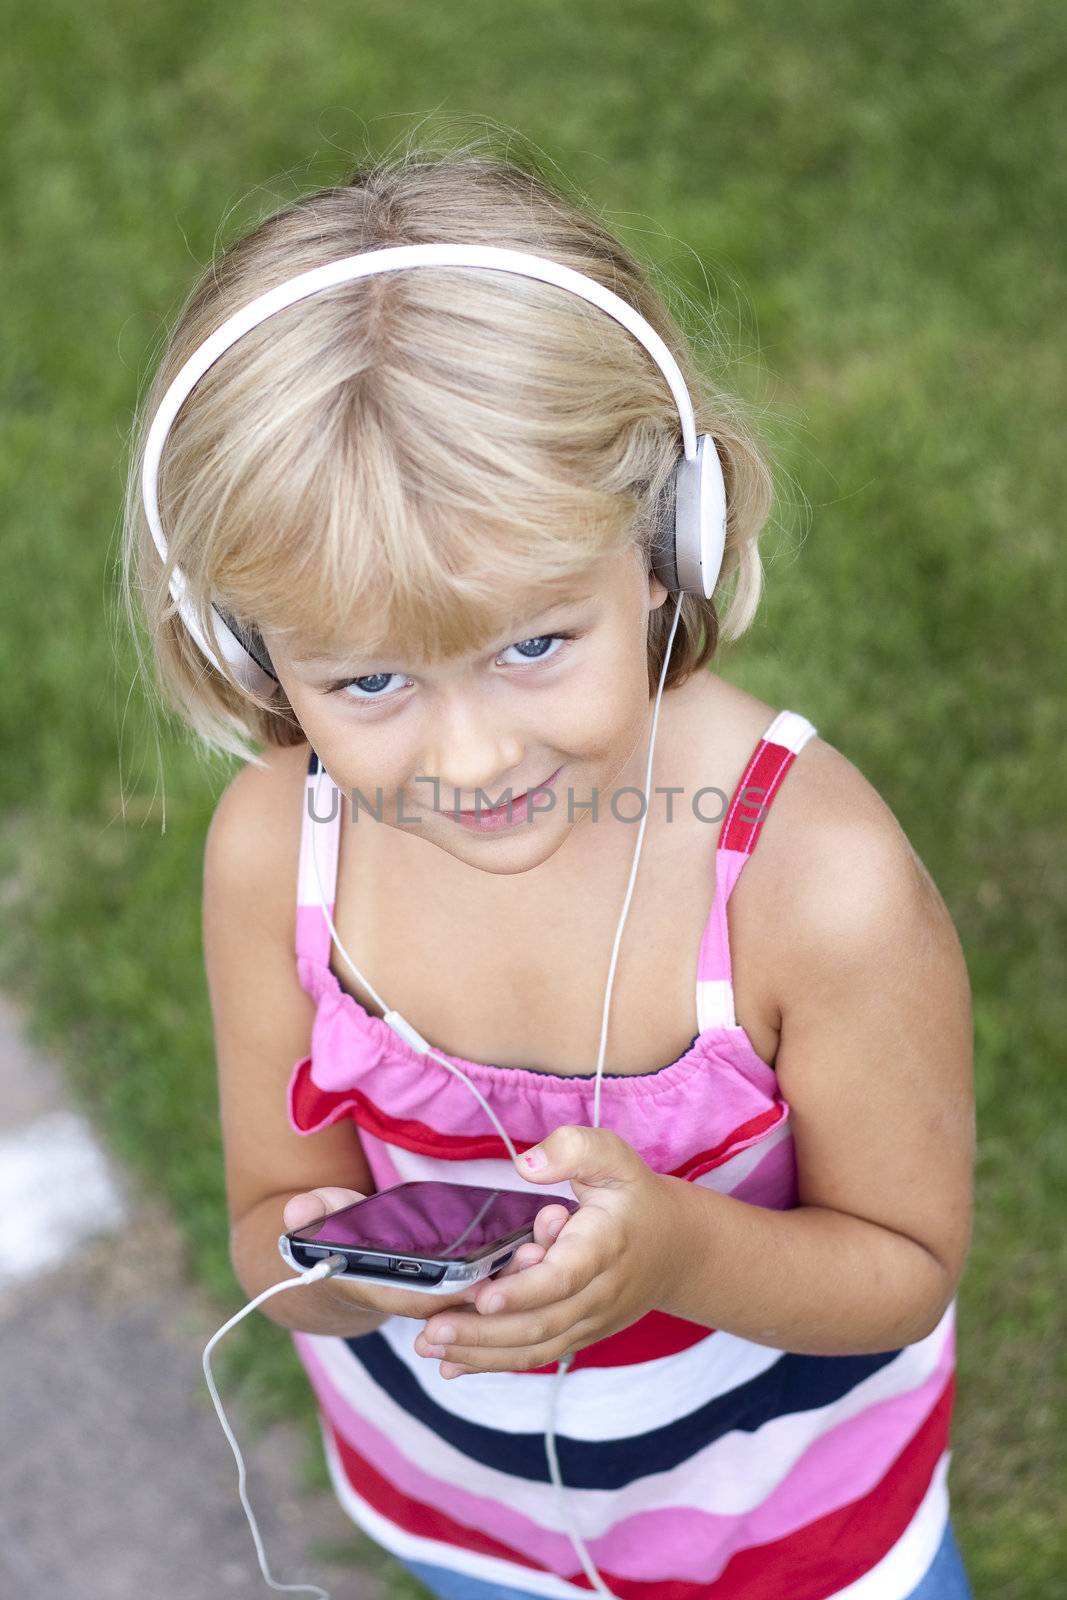 Child with smartphone and headphones by annems